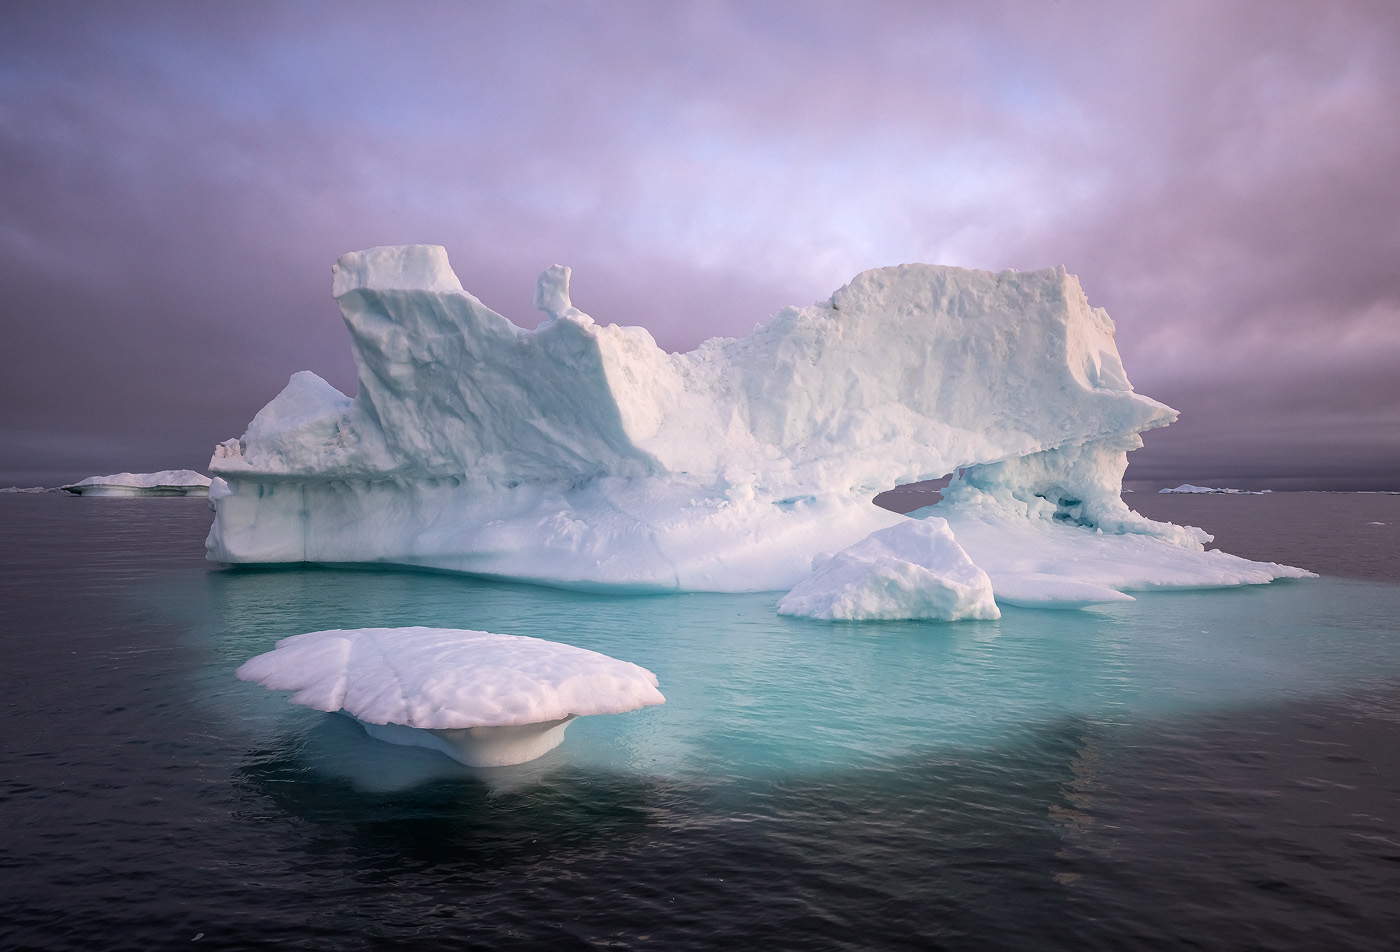 Greenland summer photography workshop - Tales of Arctic Nights ...